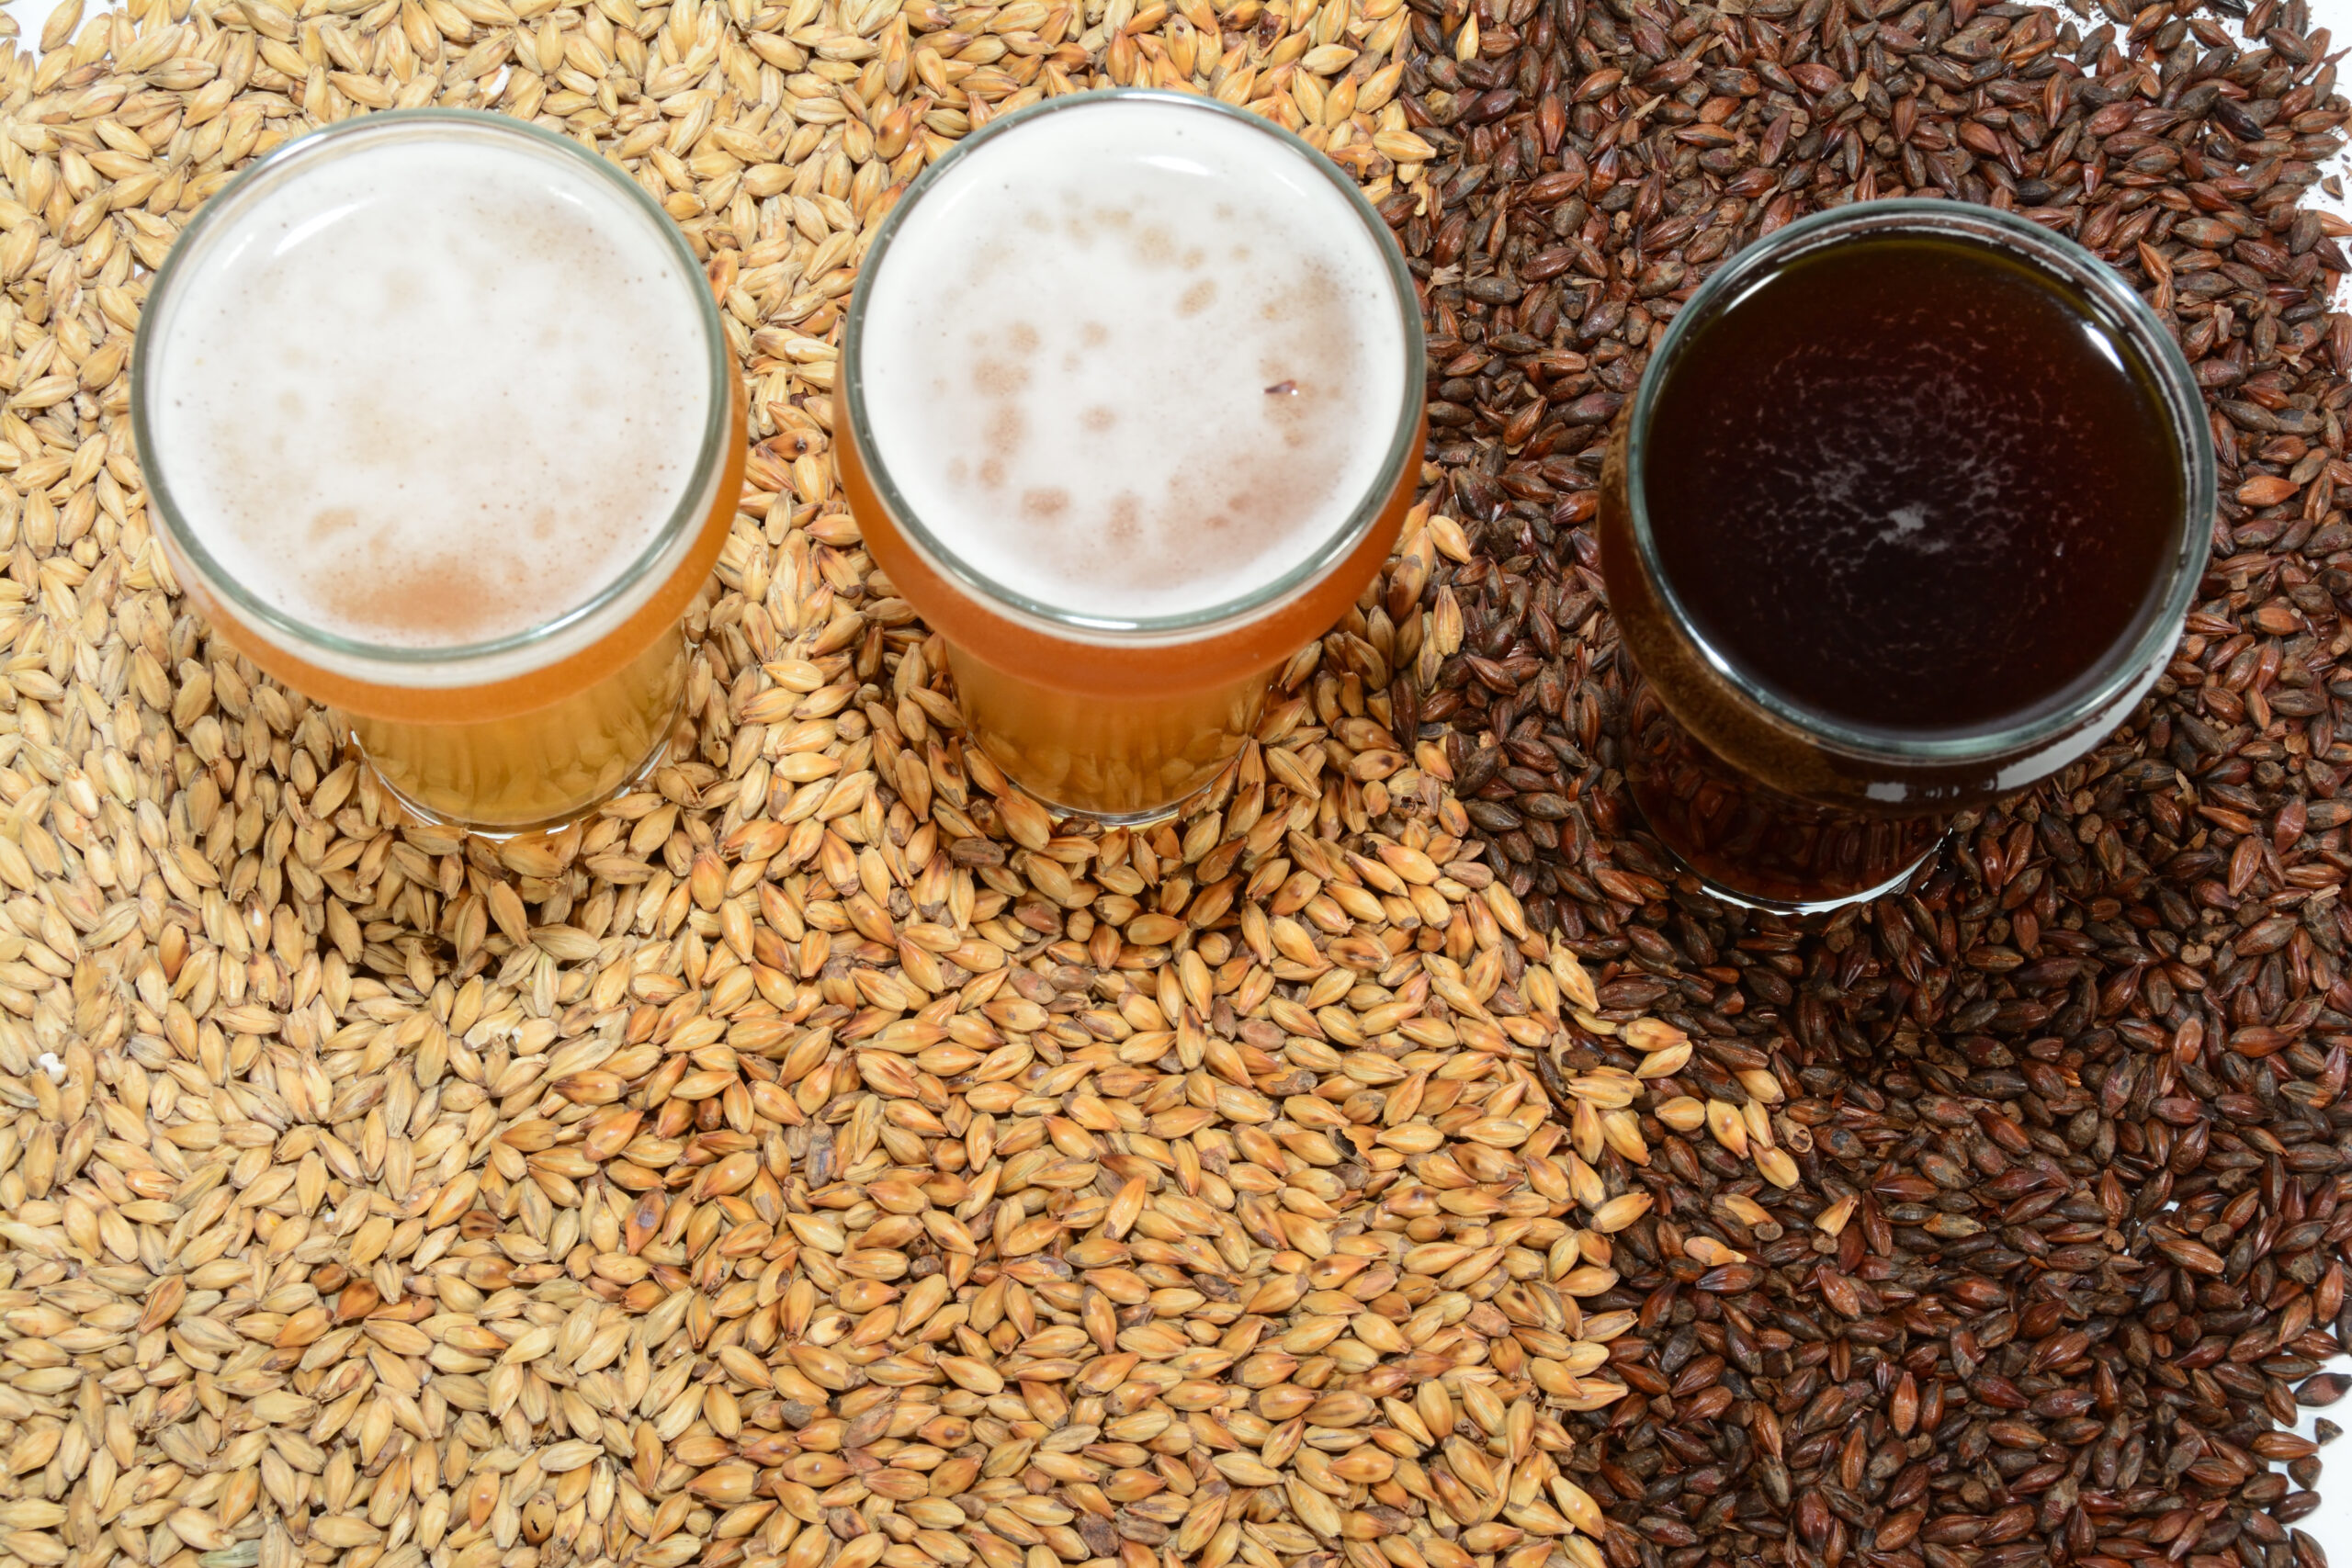 Beer ingredients with various grains illustrating different colors and the beers produced from different mixtures of grains.